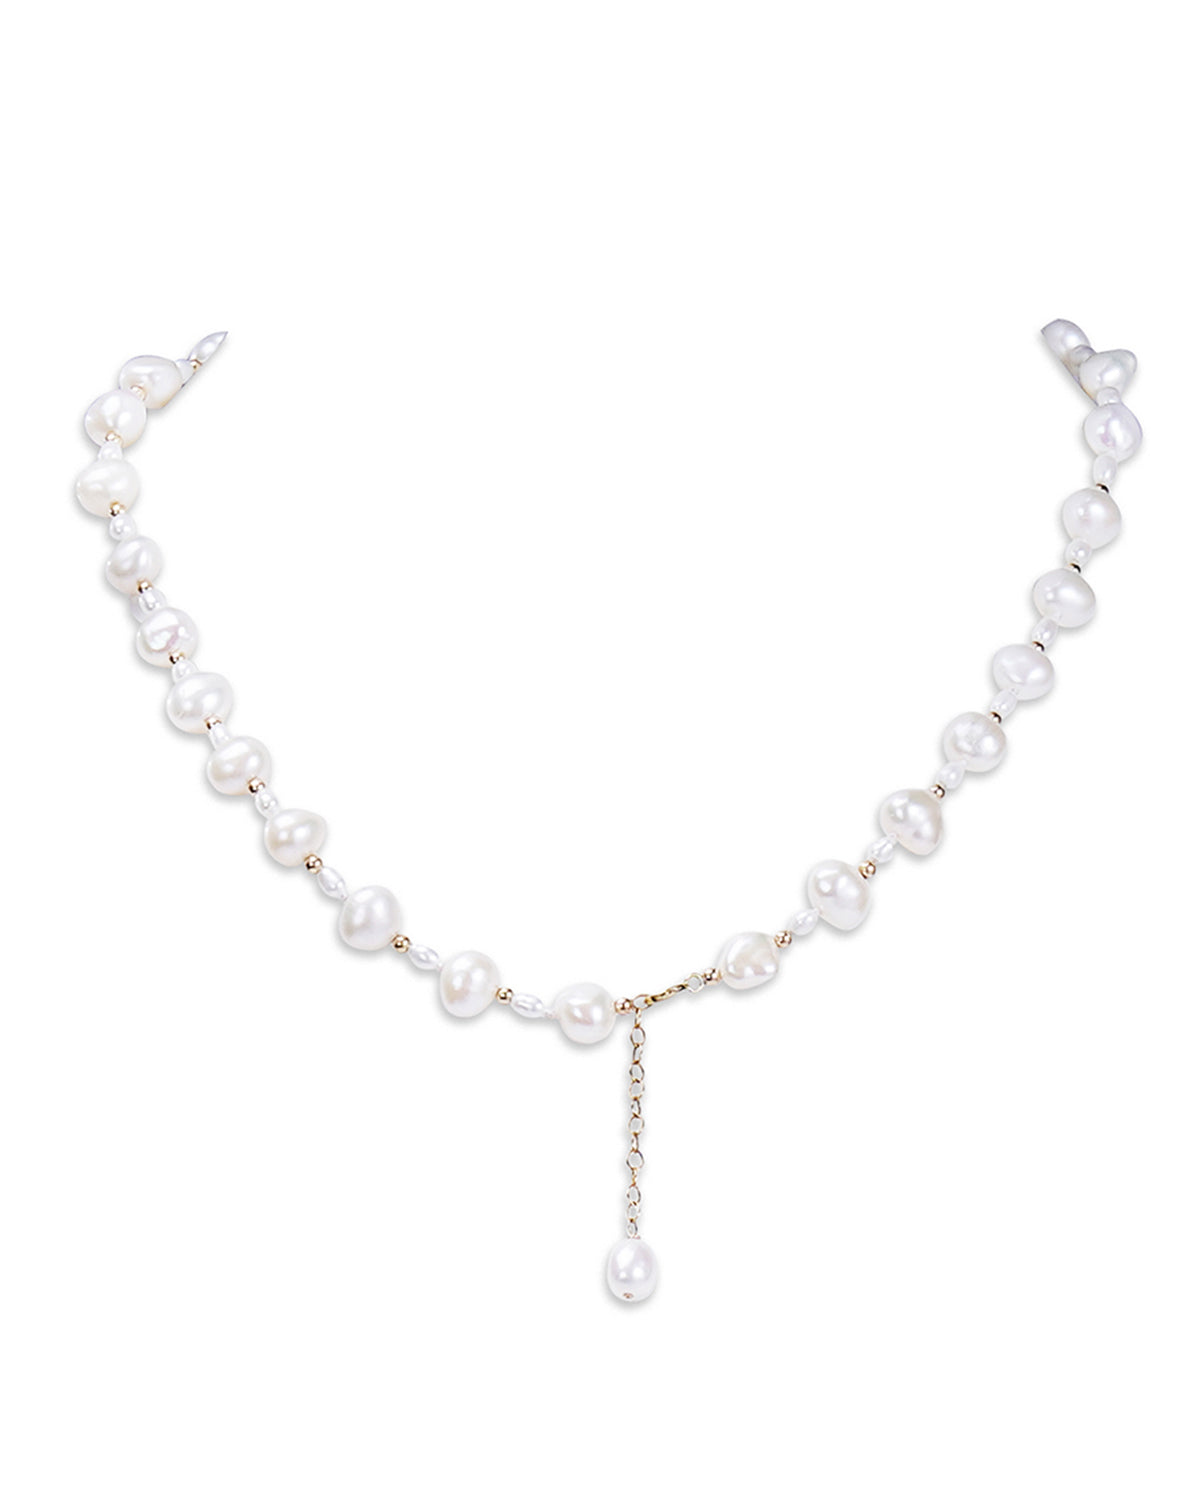 4-5mm Baroque Freshwater Pearl Gap Necklace